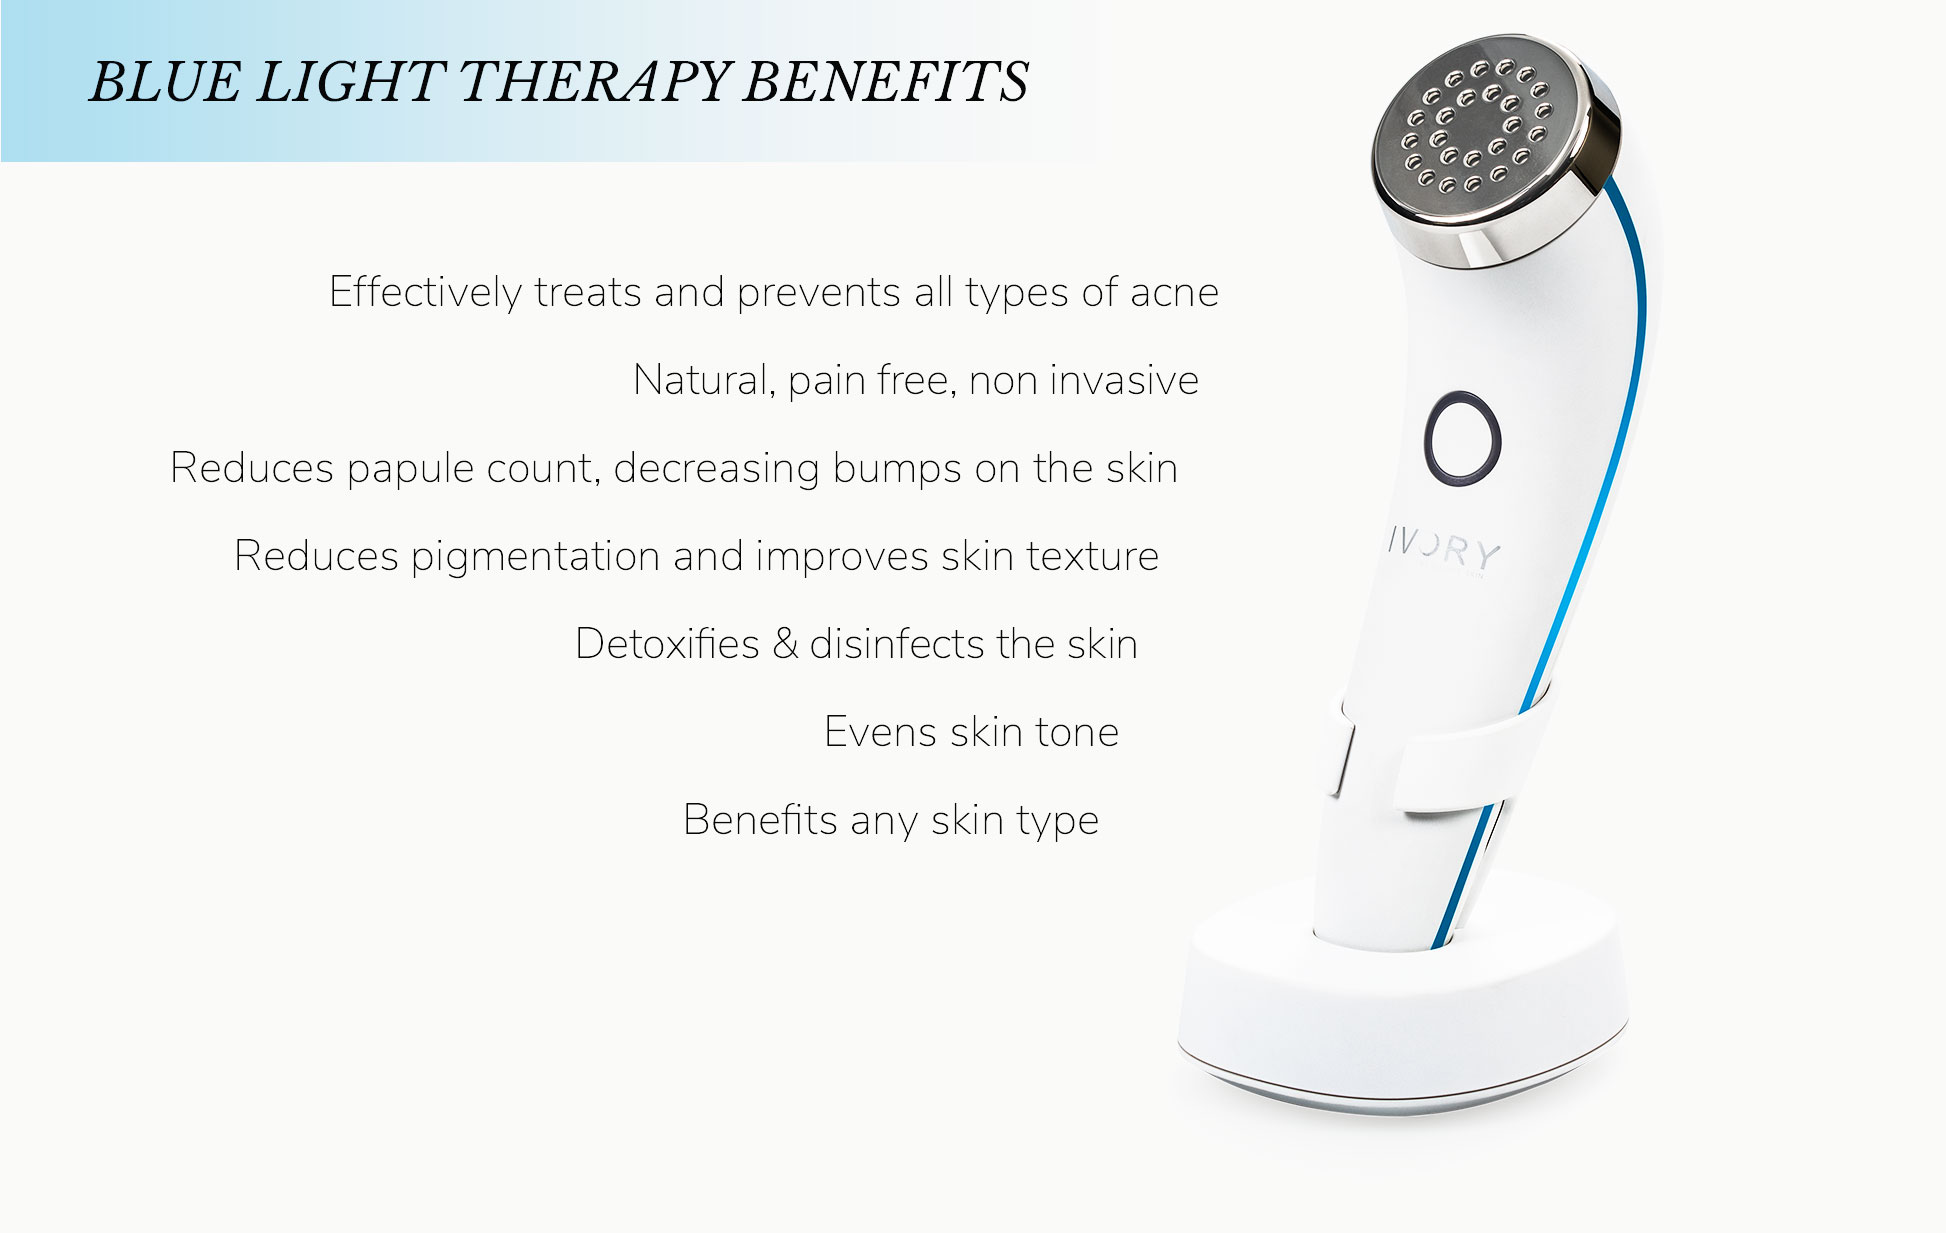 Blue light therapy benefits